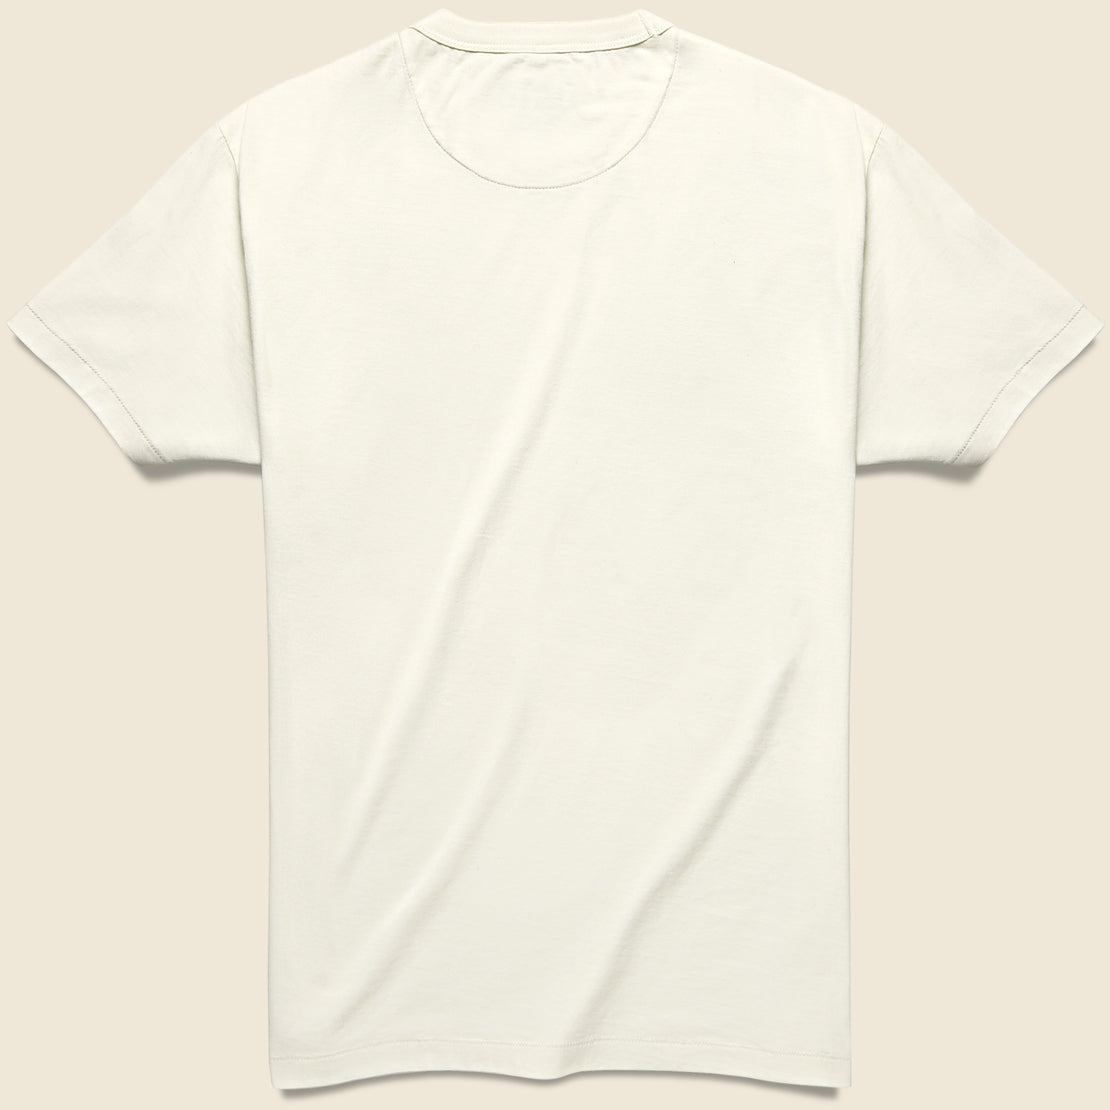 STAG Tee - White - STAG - STAG Provisions - Tops - S/S Tee